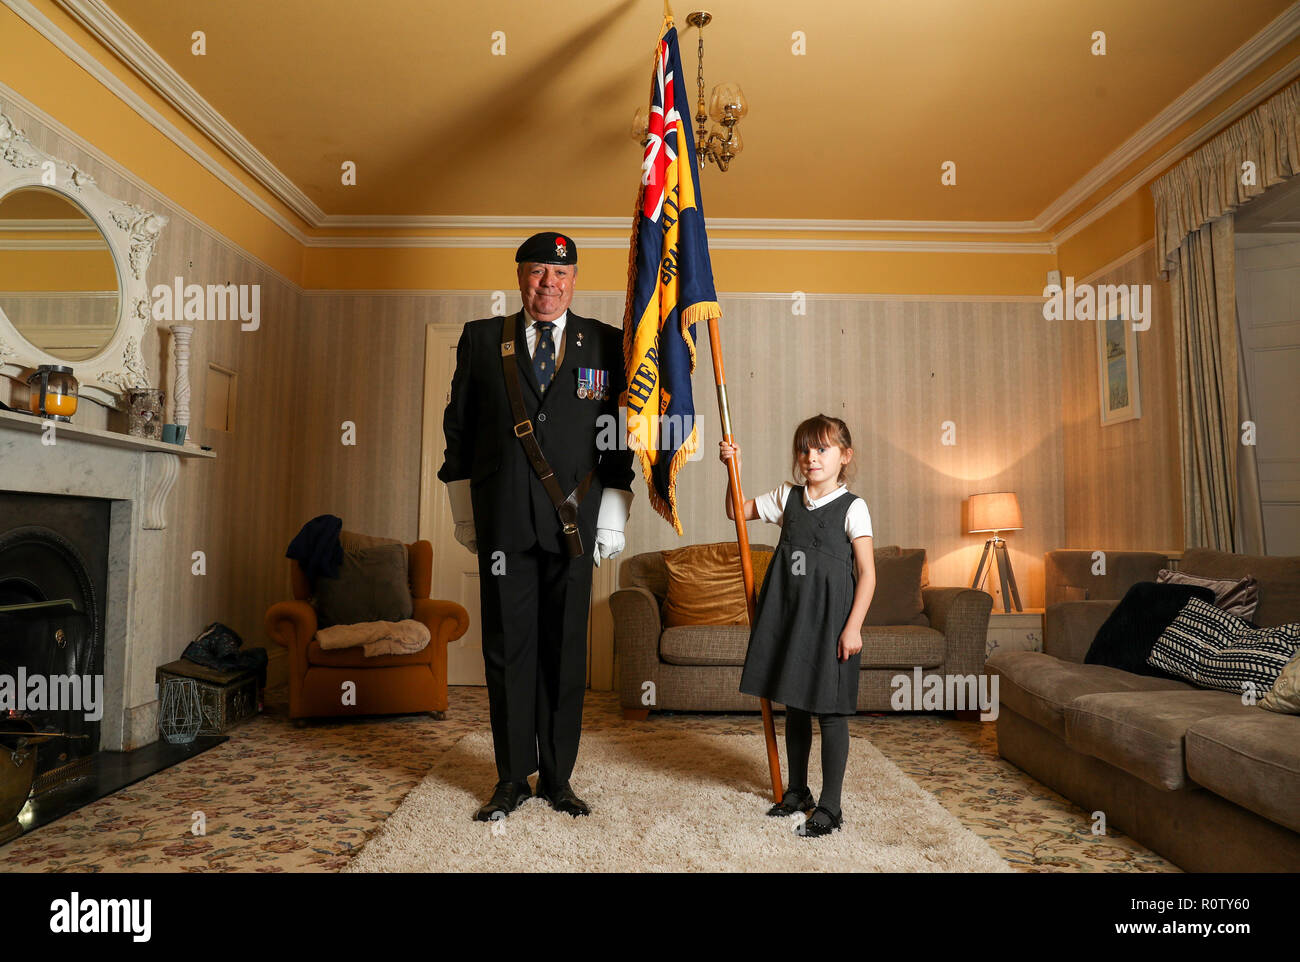 Mollie Stonelake, seven, holds a full-size standard from the Torpoint & District Branch of the Royal British Legion alongside branch chairman Colin Prideaux, in her family home in Torpoint, Cornwall. Mollie went on her first parade aged five and will carry a specially-made miniature standard in a service on Sunday in her home town of Torpoint in Cornwall. Stock Photo